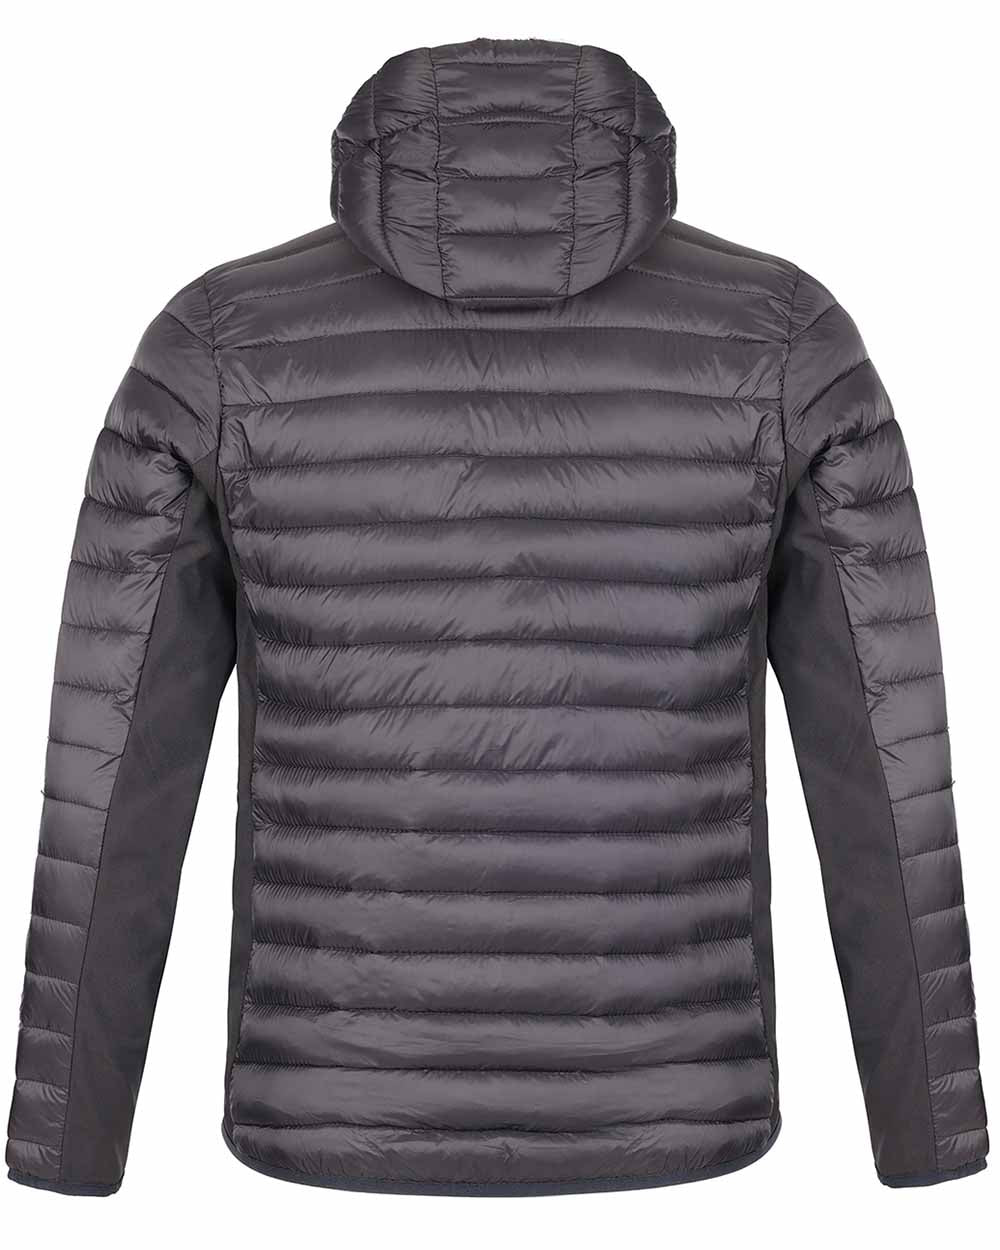 Back view of hood Black TuffStuff Hatton Softshell and Quilted Jacket